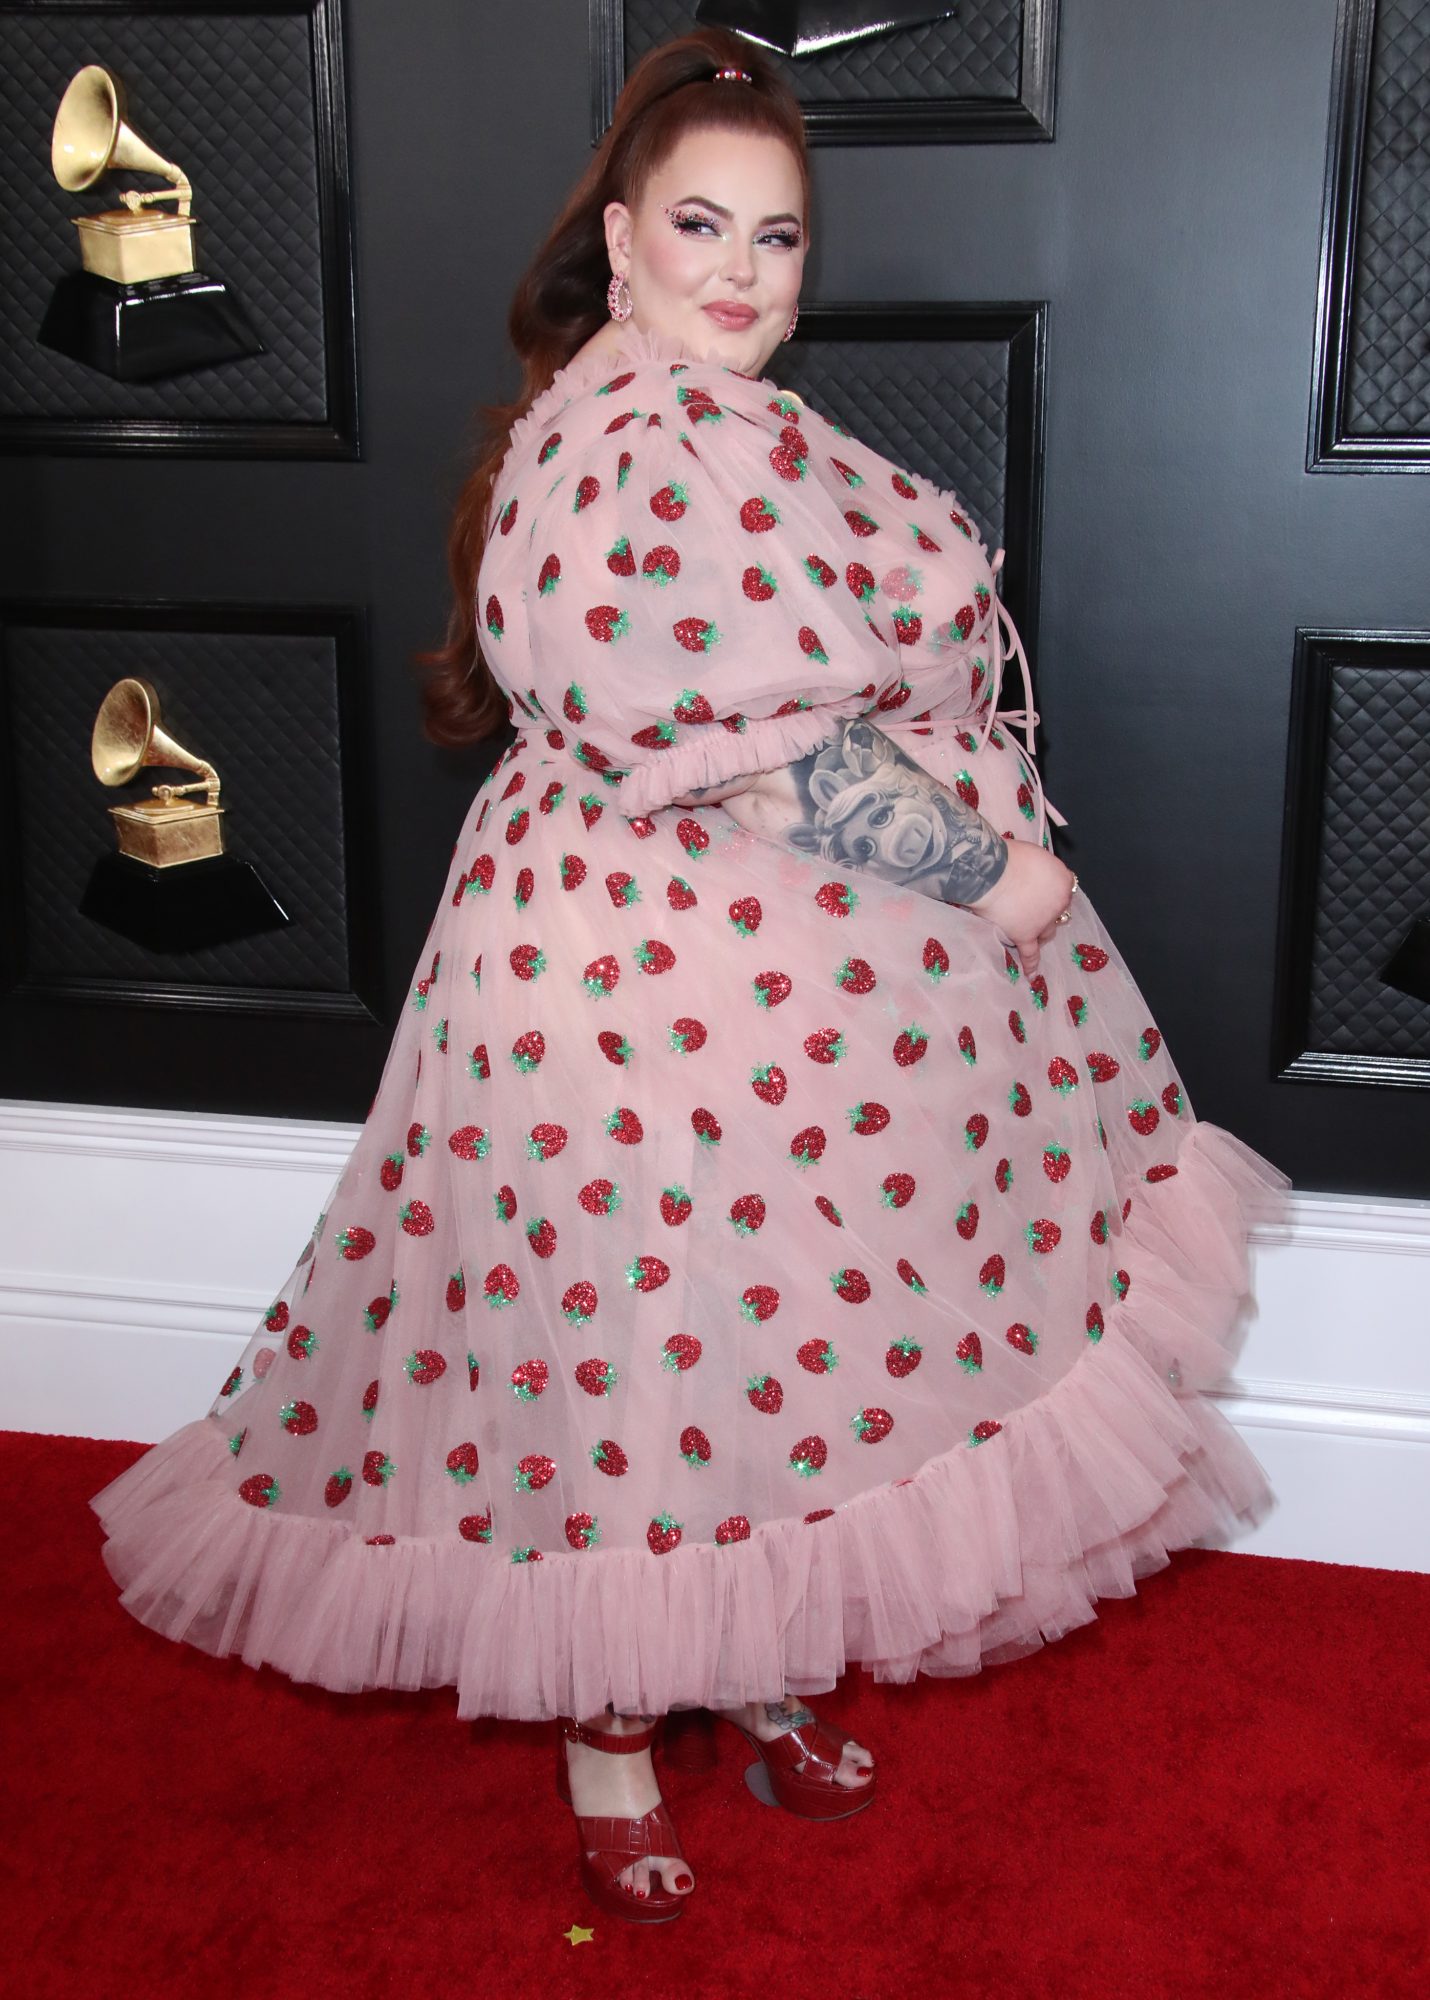 Tess Holliday slams tabloid for fat-shaming her while at Disneyland with  her son